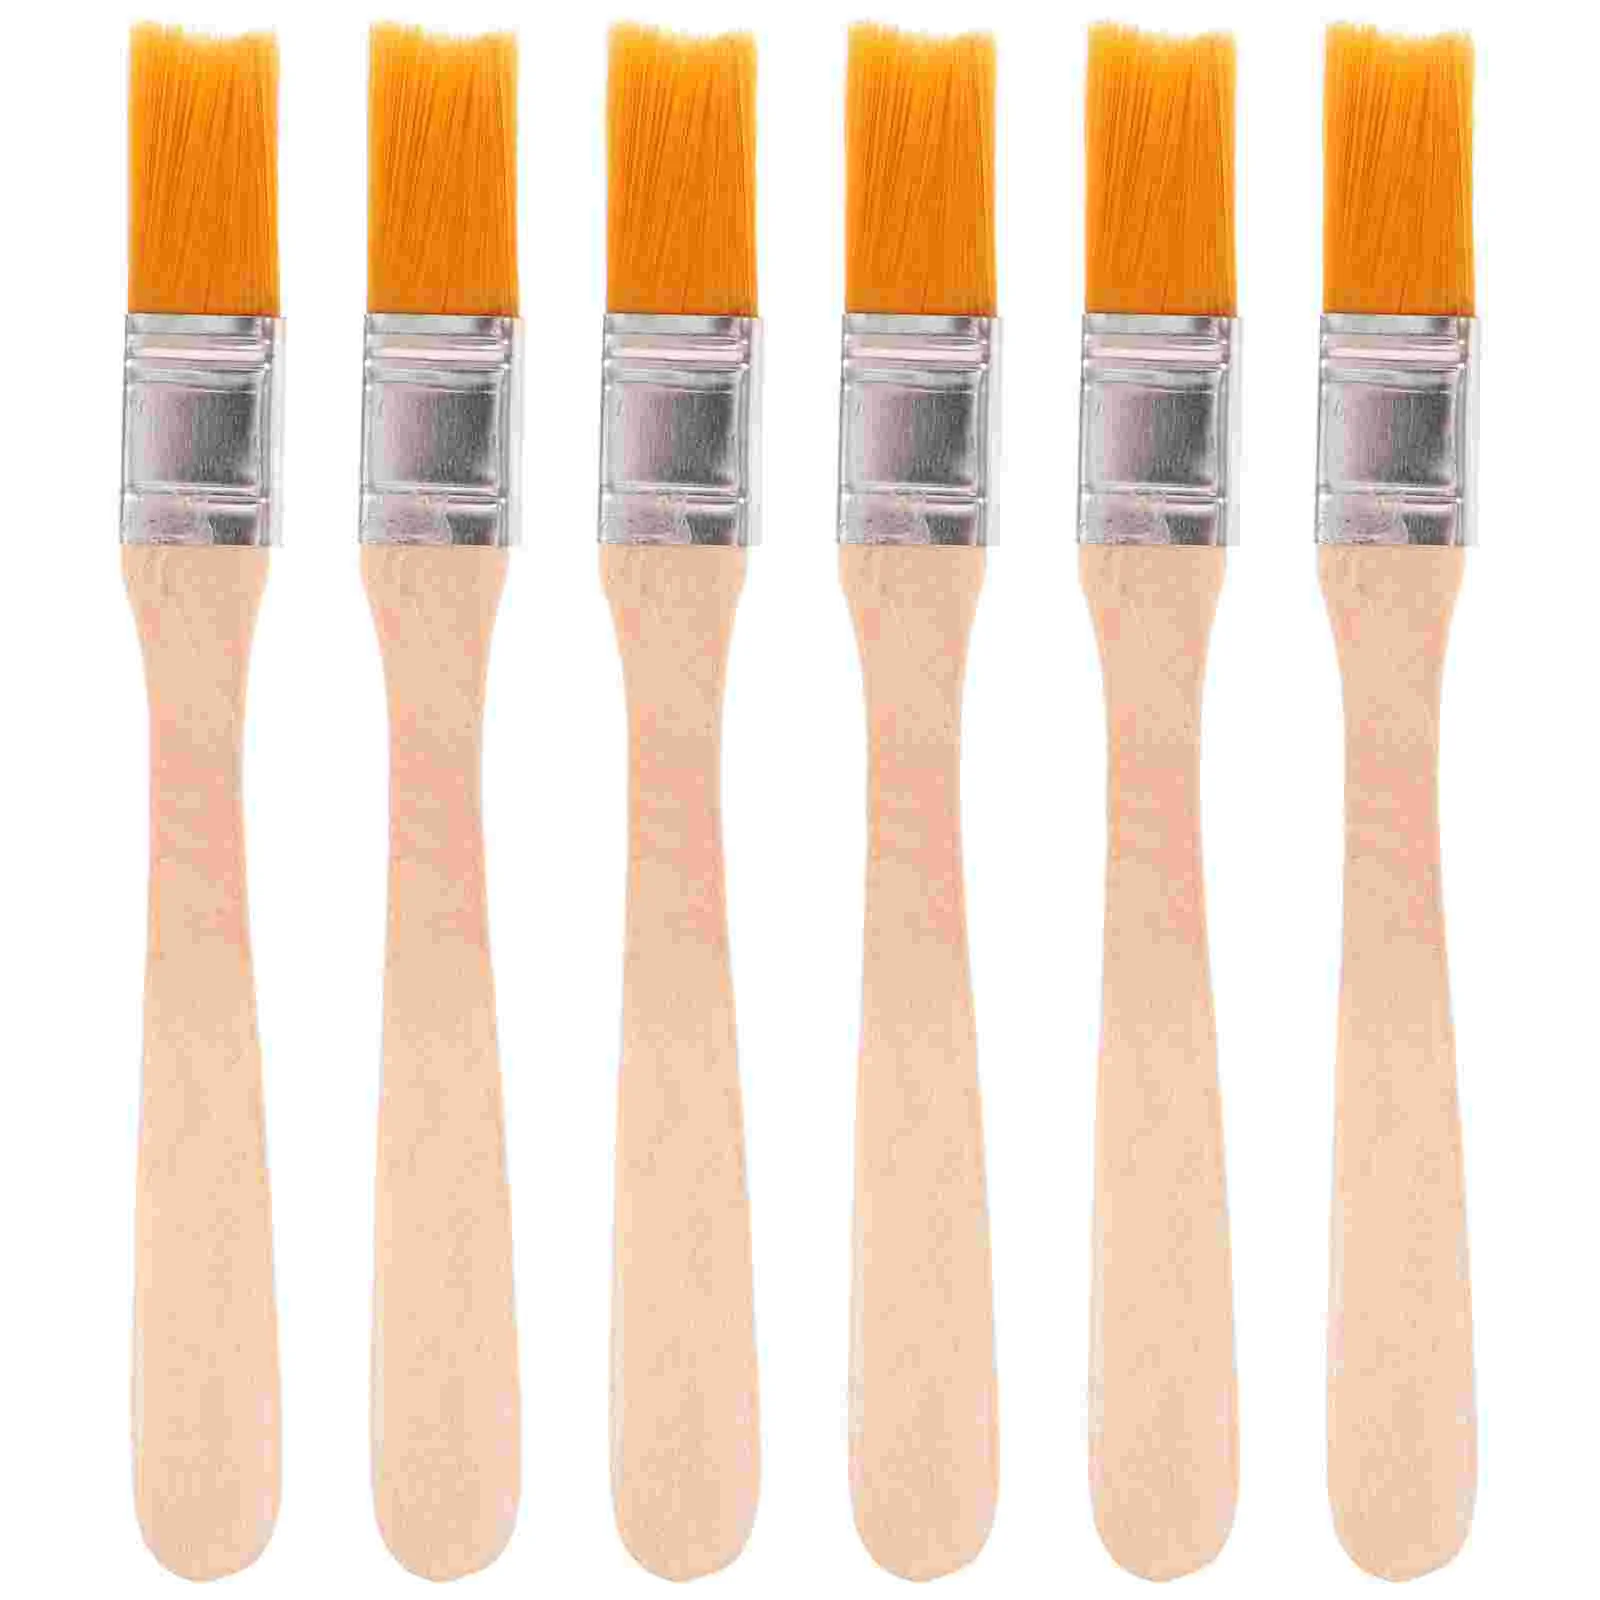 

6 Pcs Paint Brush Painting for Wall Small with Wood Handle Brushes Kids Reusable Portable Half Inch Oil Paintbrush Major Wooden